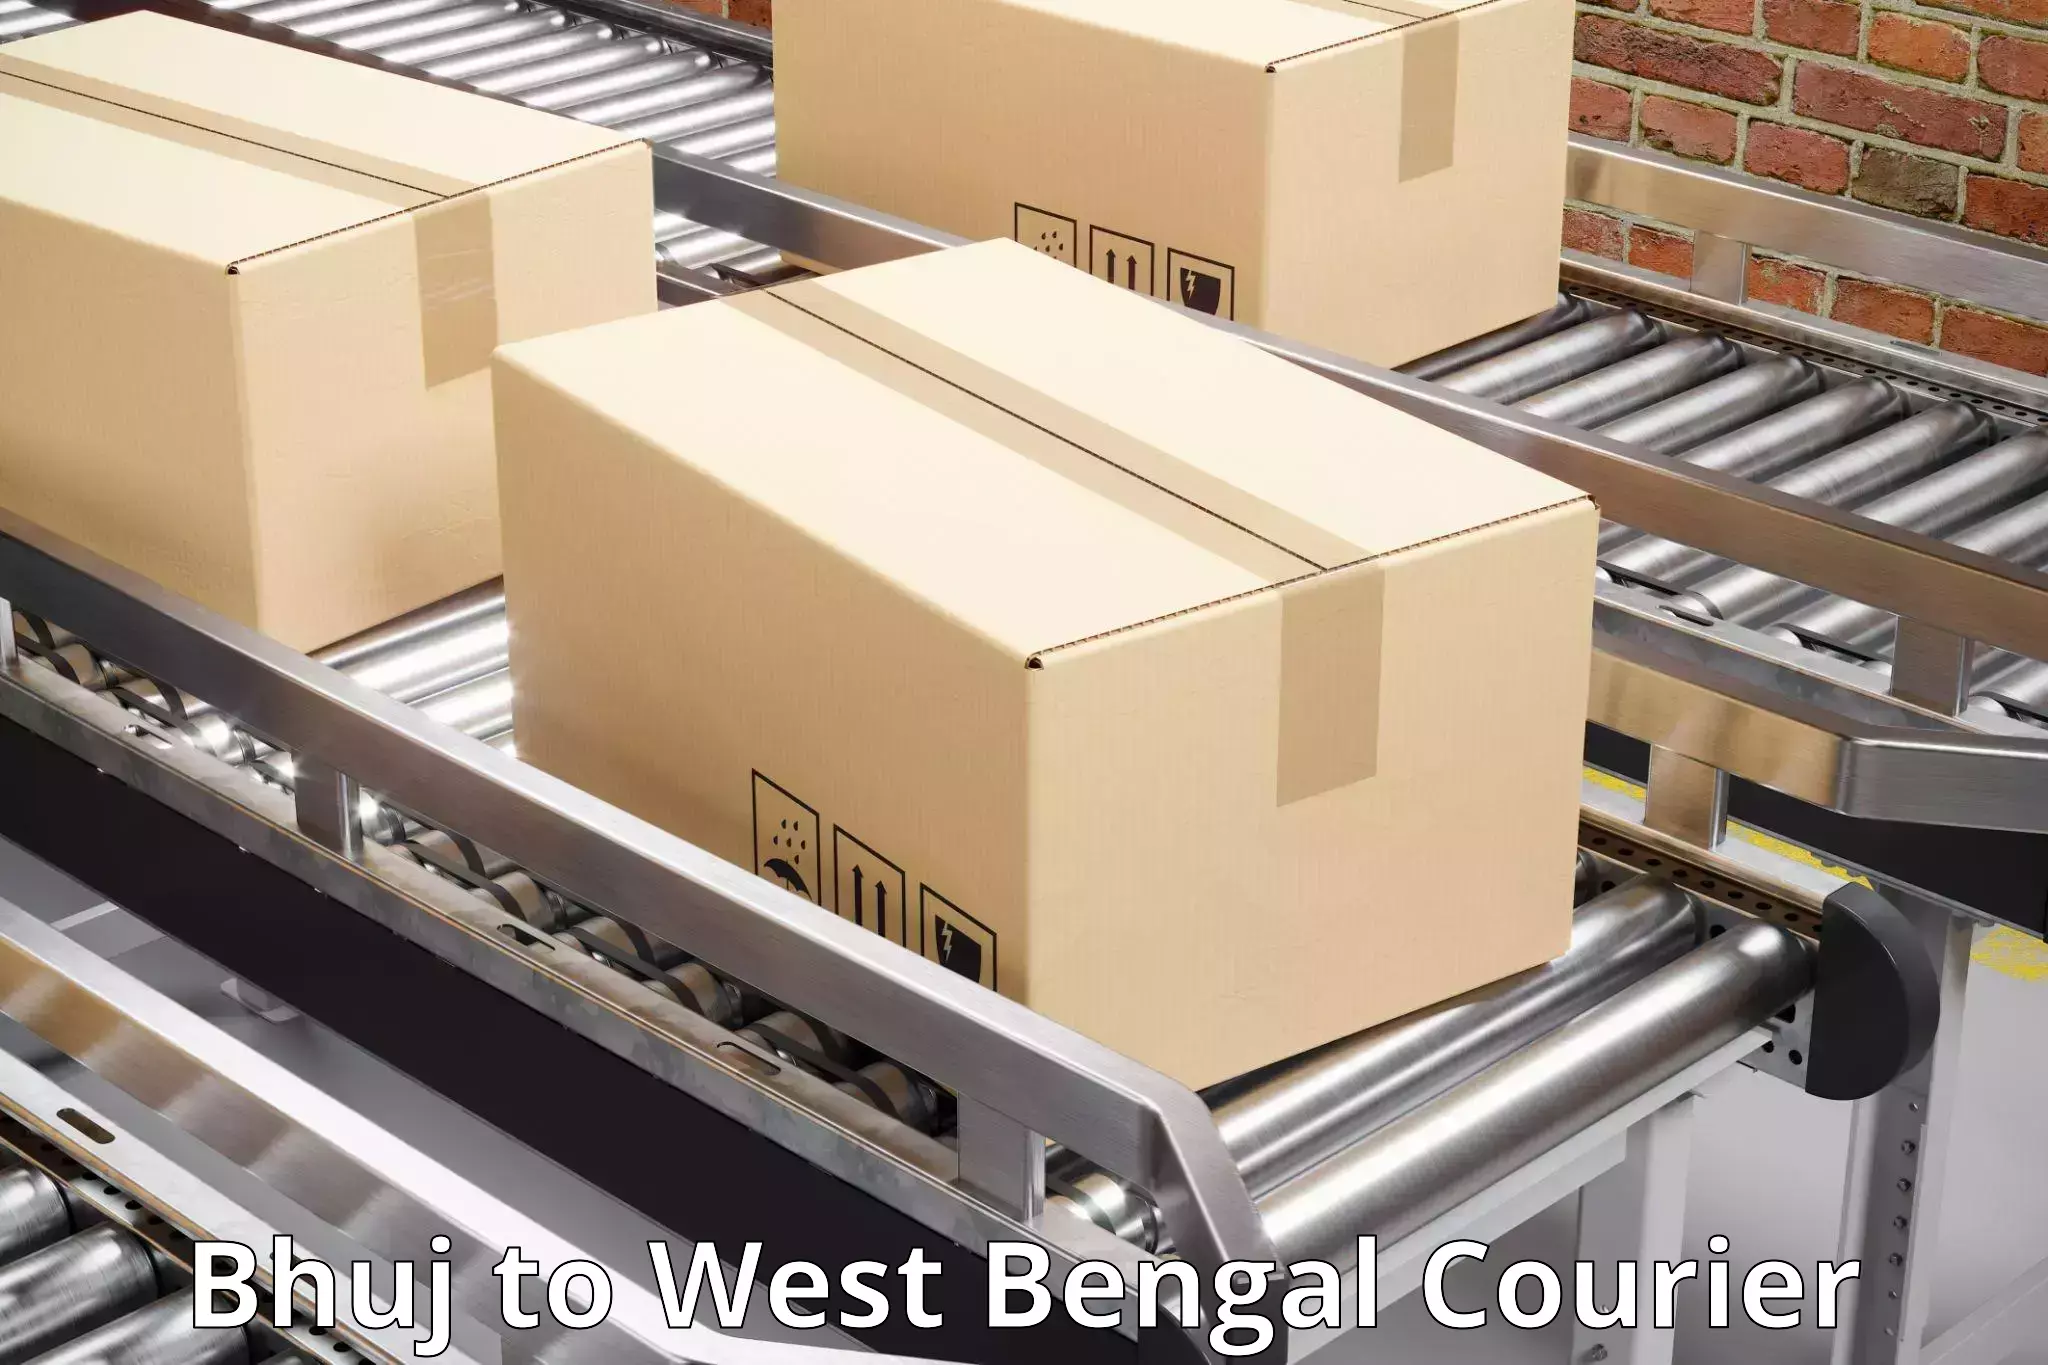 Nationwide shipping coverage Bhuj to Barasat